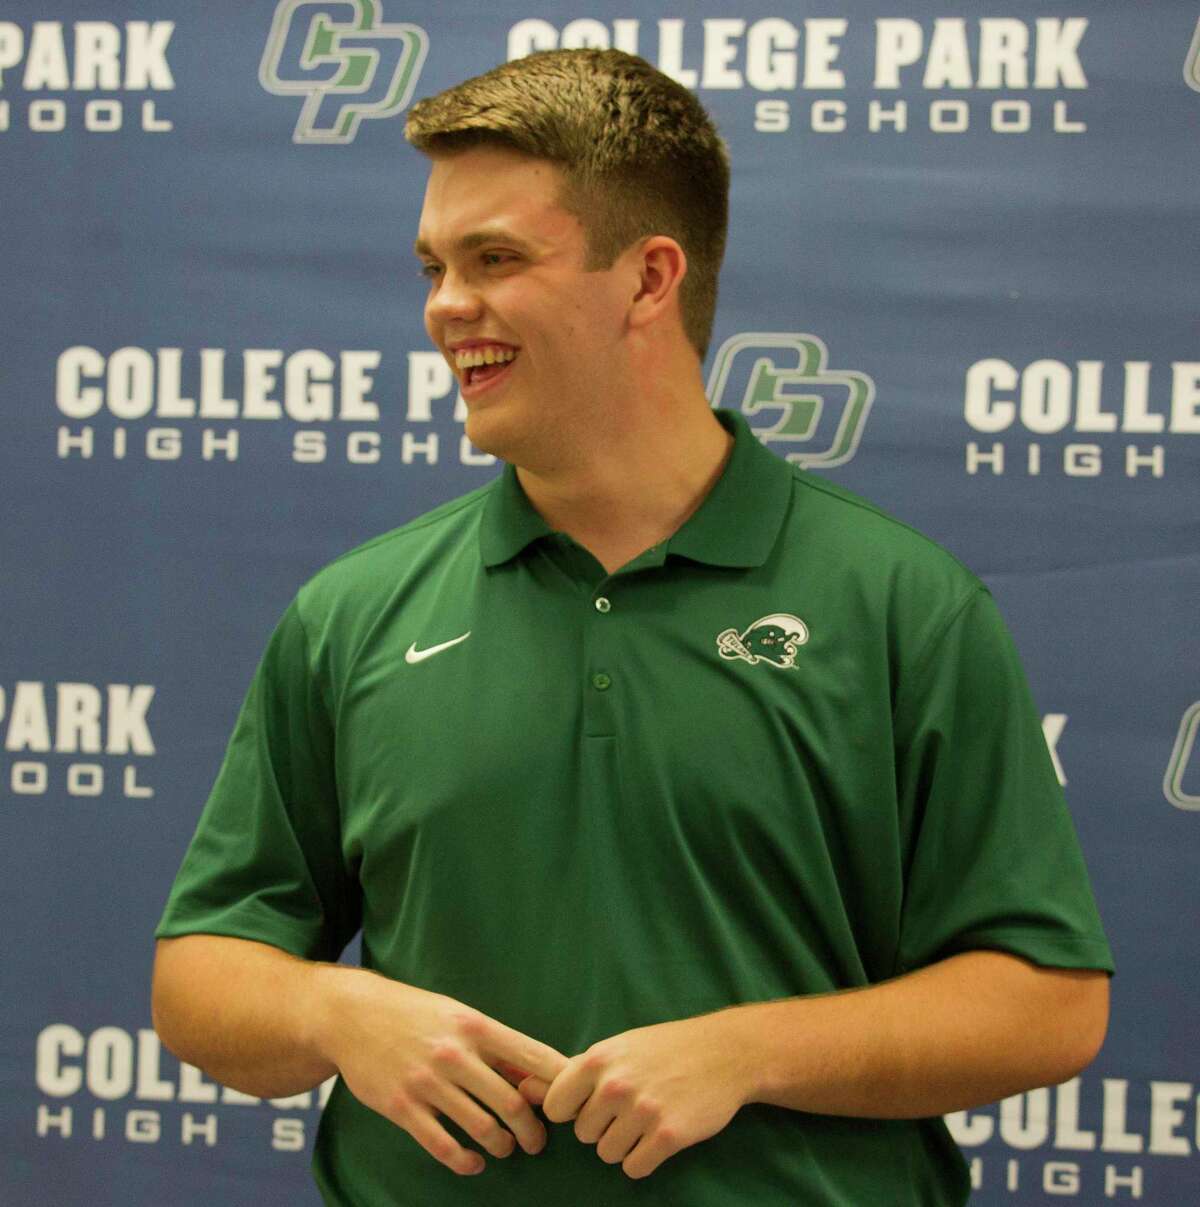 College Park offensive lineman Jackson Fort thanks friends, family, teachers and coaches after signing to play football for Tulane during a signing day ceremony at College Park West High School, Wednesday, Dec. 19, 2018, in The Woodlands.